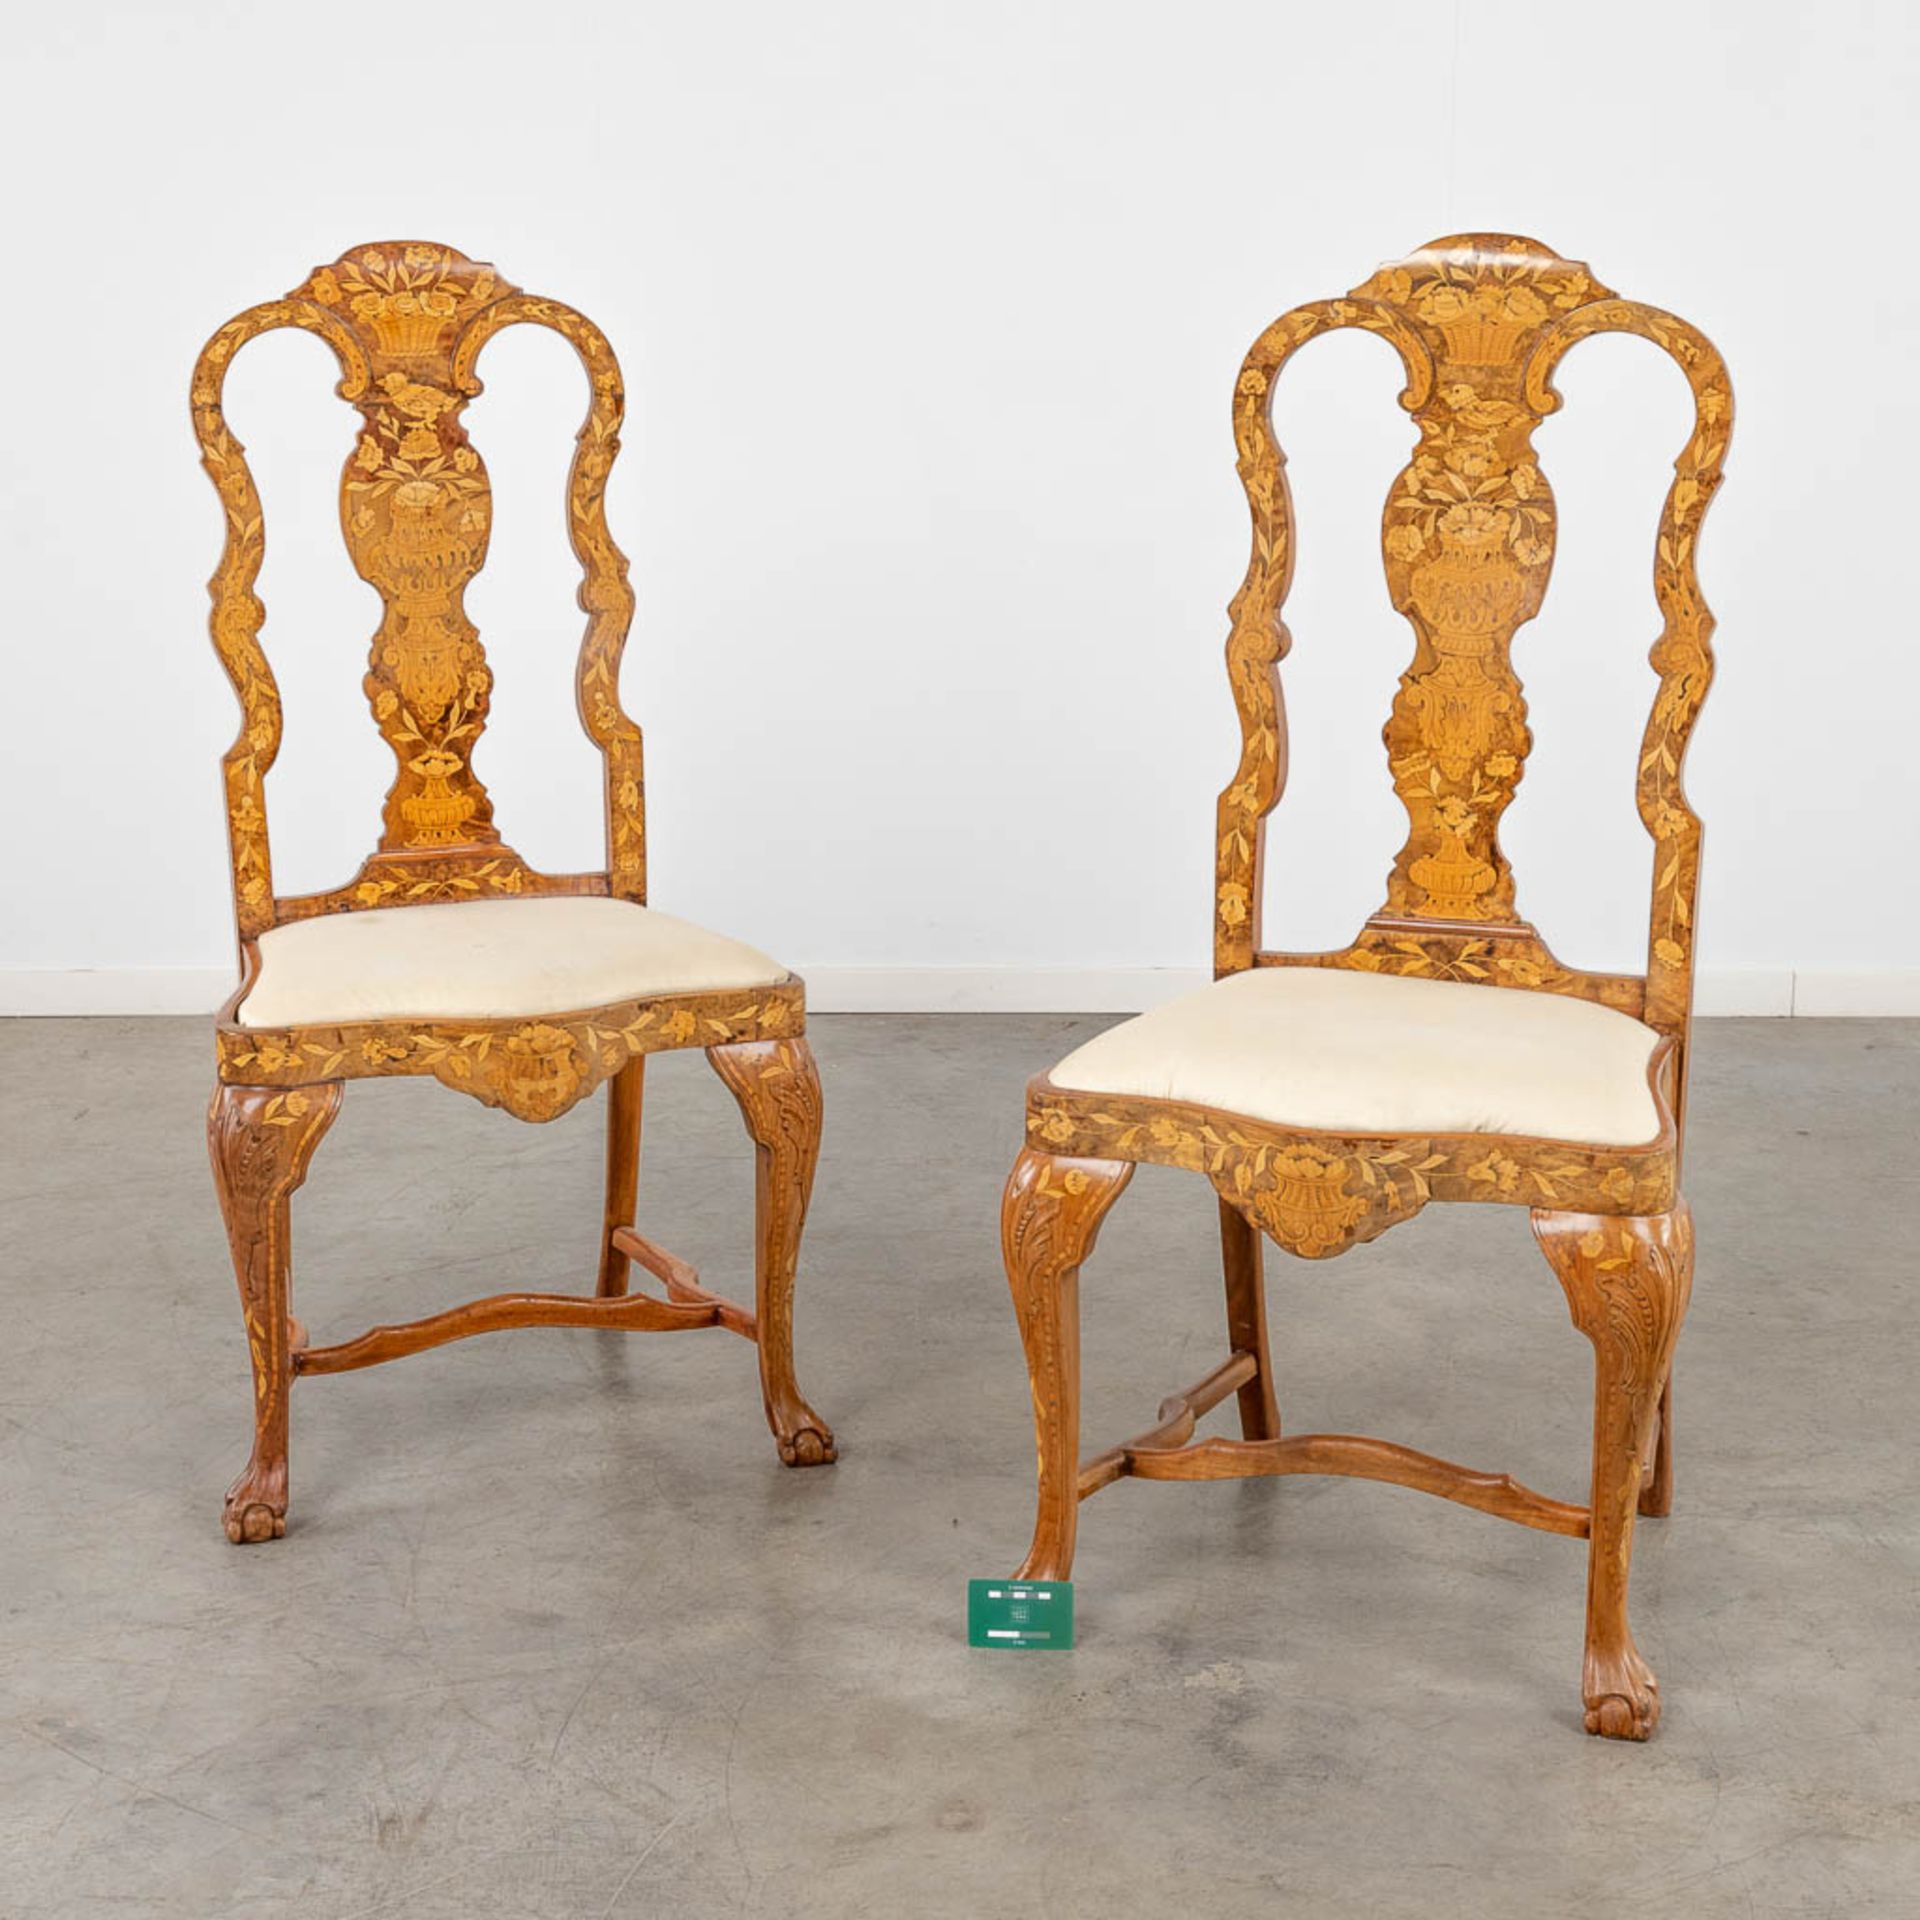 A pair of chairs with flower marquetry, 18th C. (L:46 x W:55 x H:112 cm) - Bild 2 aus 17